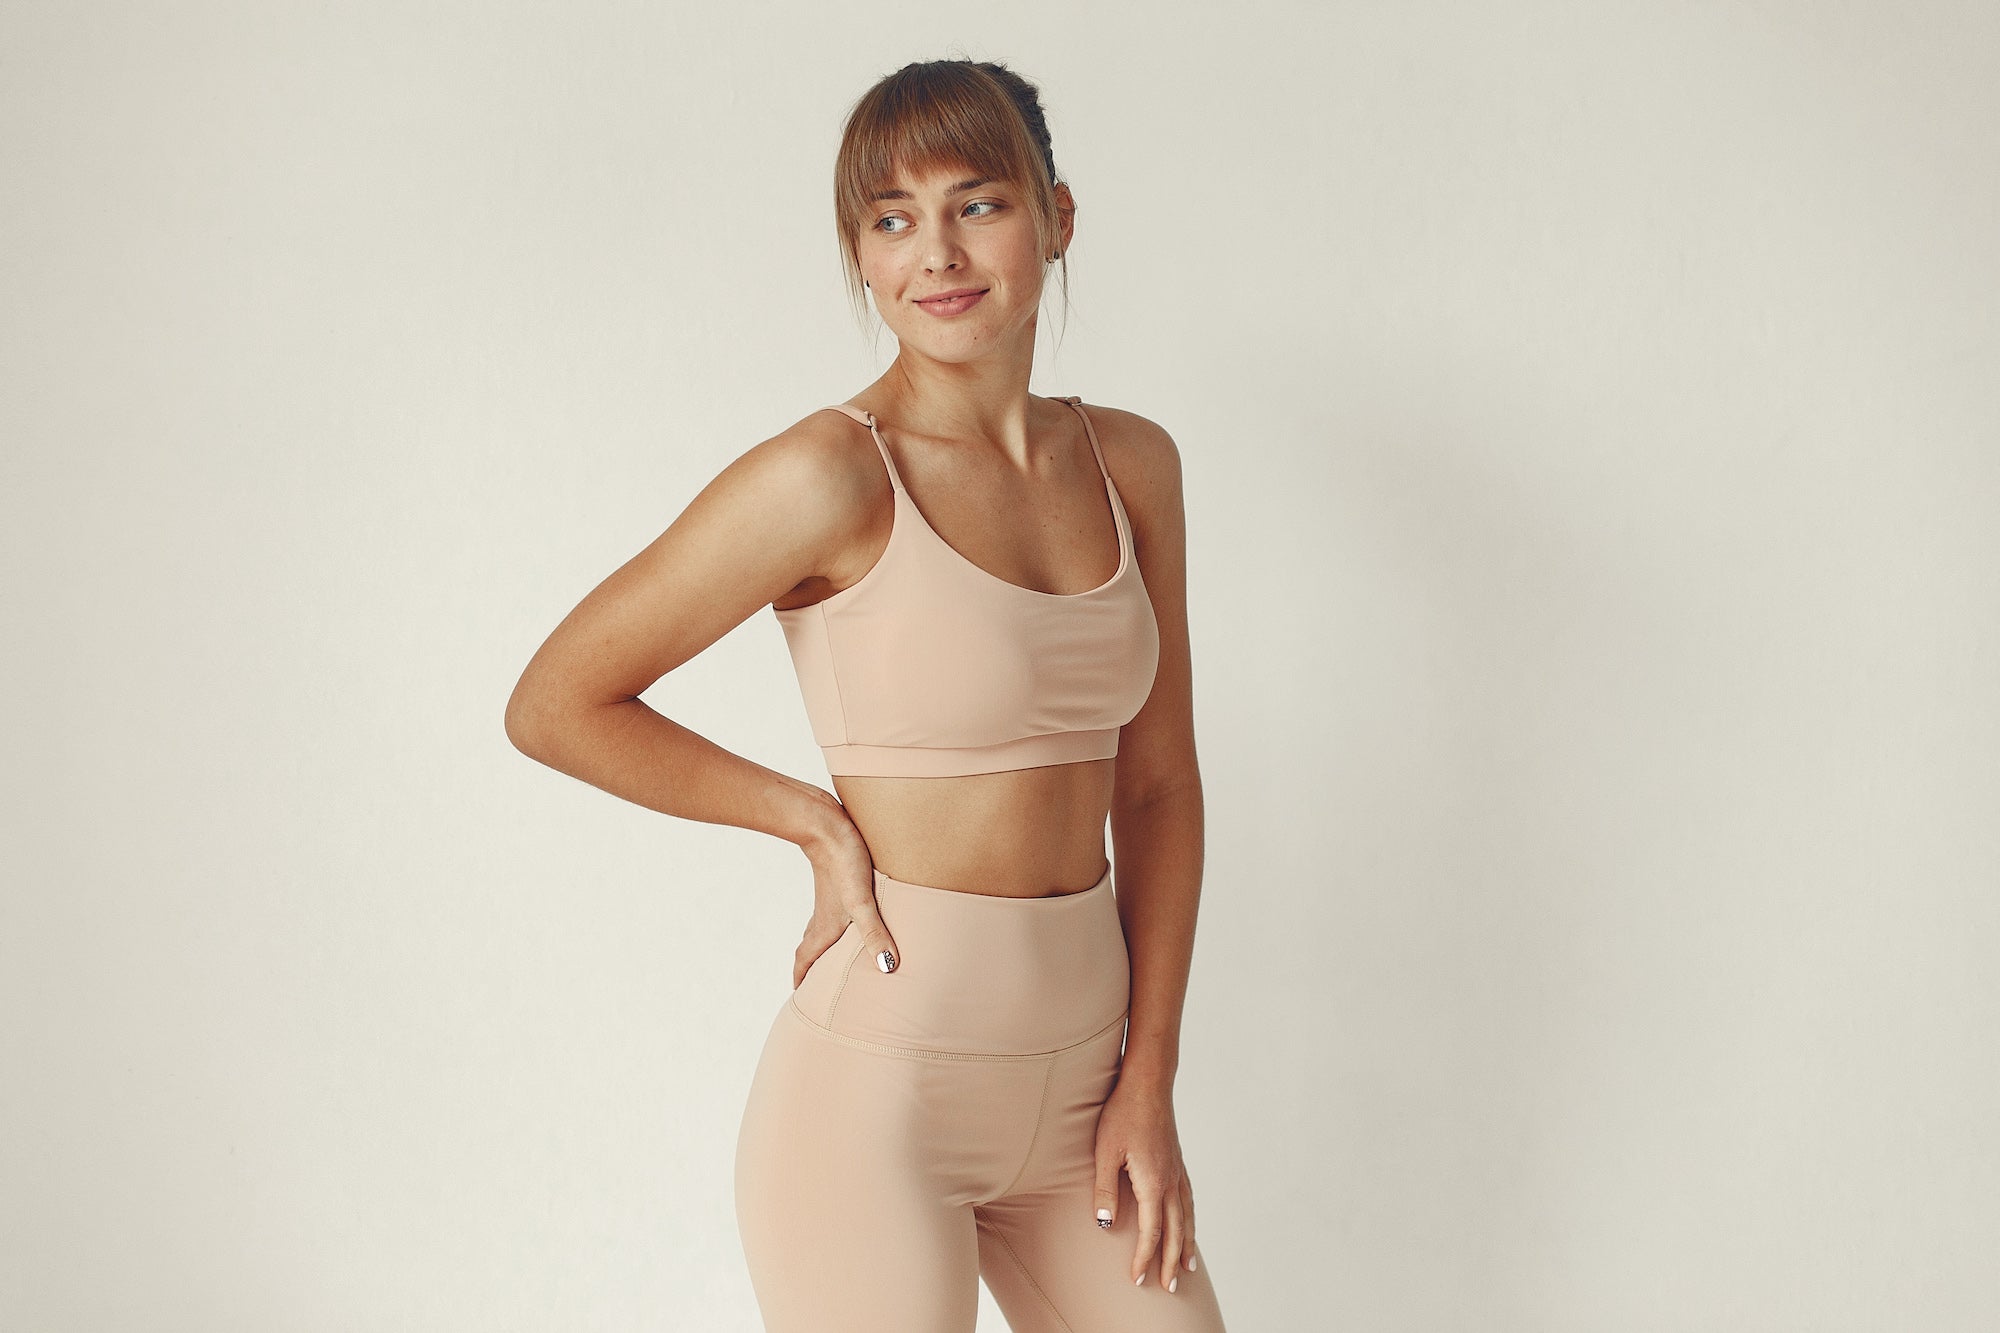 How Shapewear is Silently Reshaping the Plus-Size Landscape